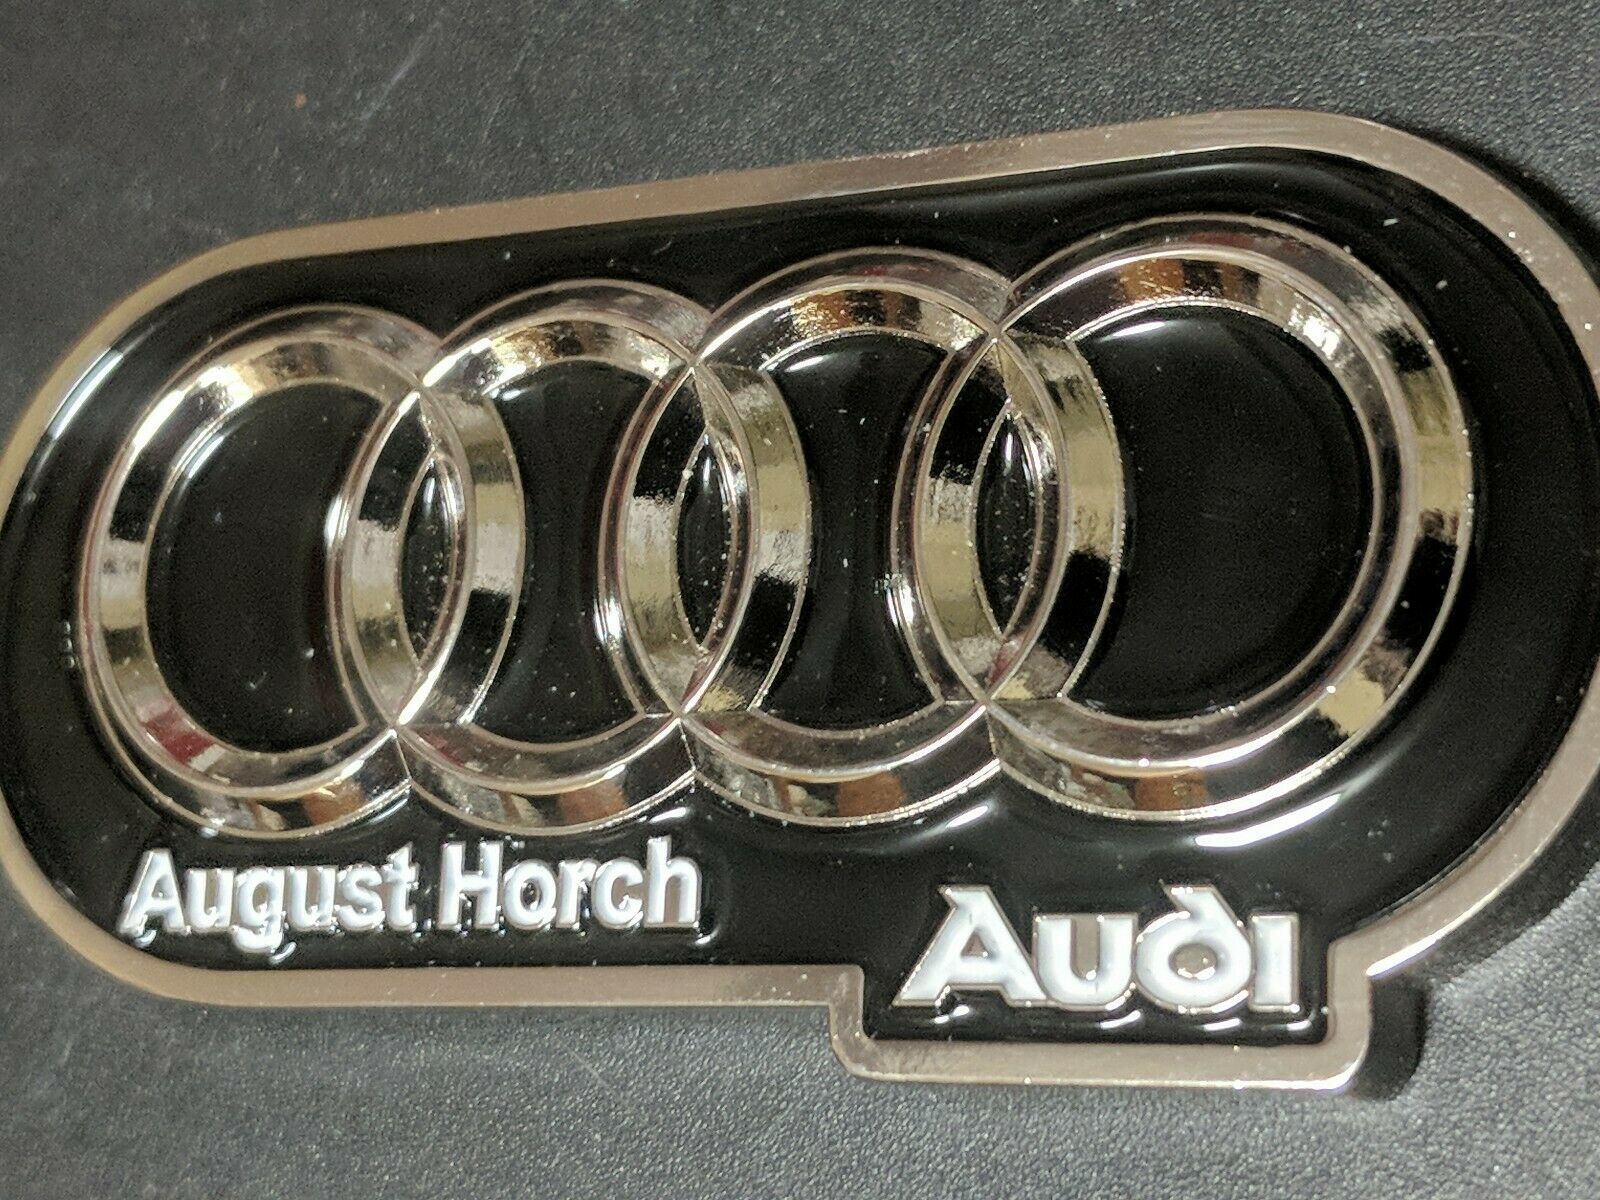 Audi Tribute Keychain to The Founder "August Horch".1899.(i13) - $14.99